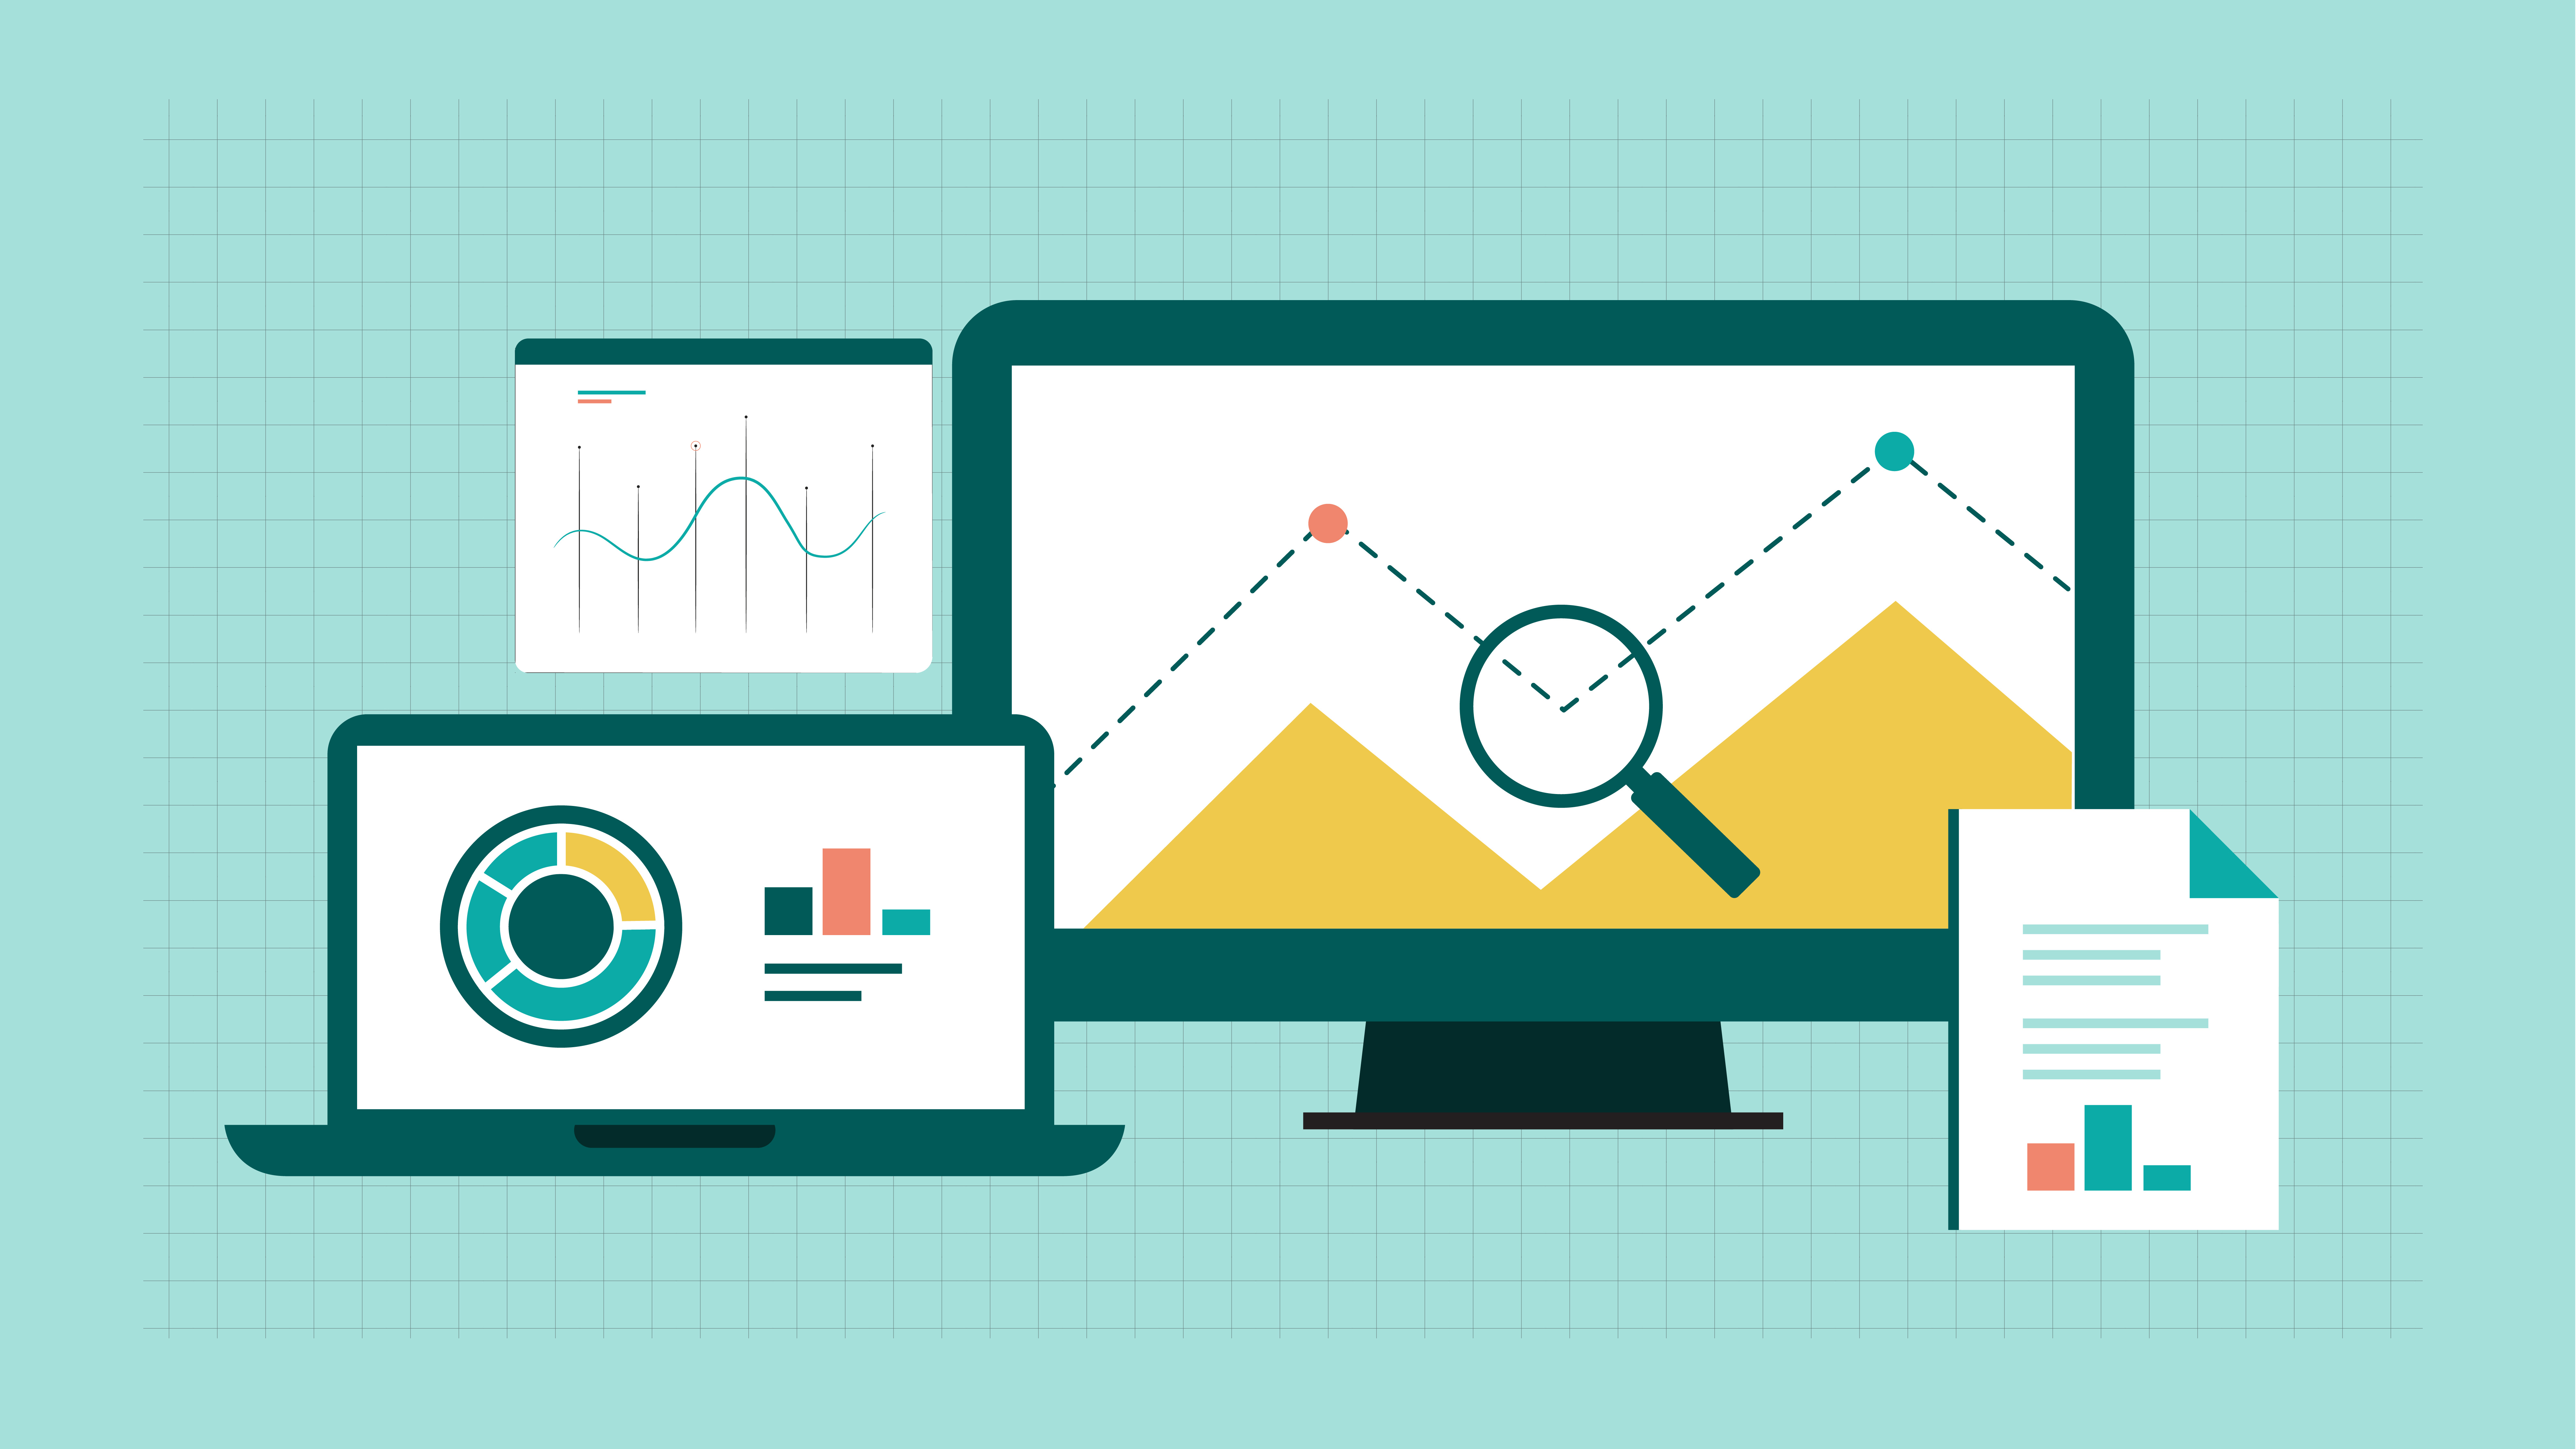 Product Metrics Your Growth Team Should Be Tracking